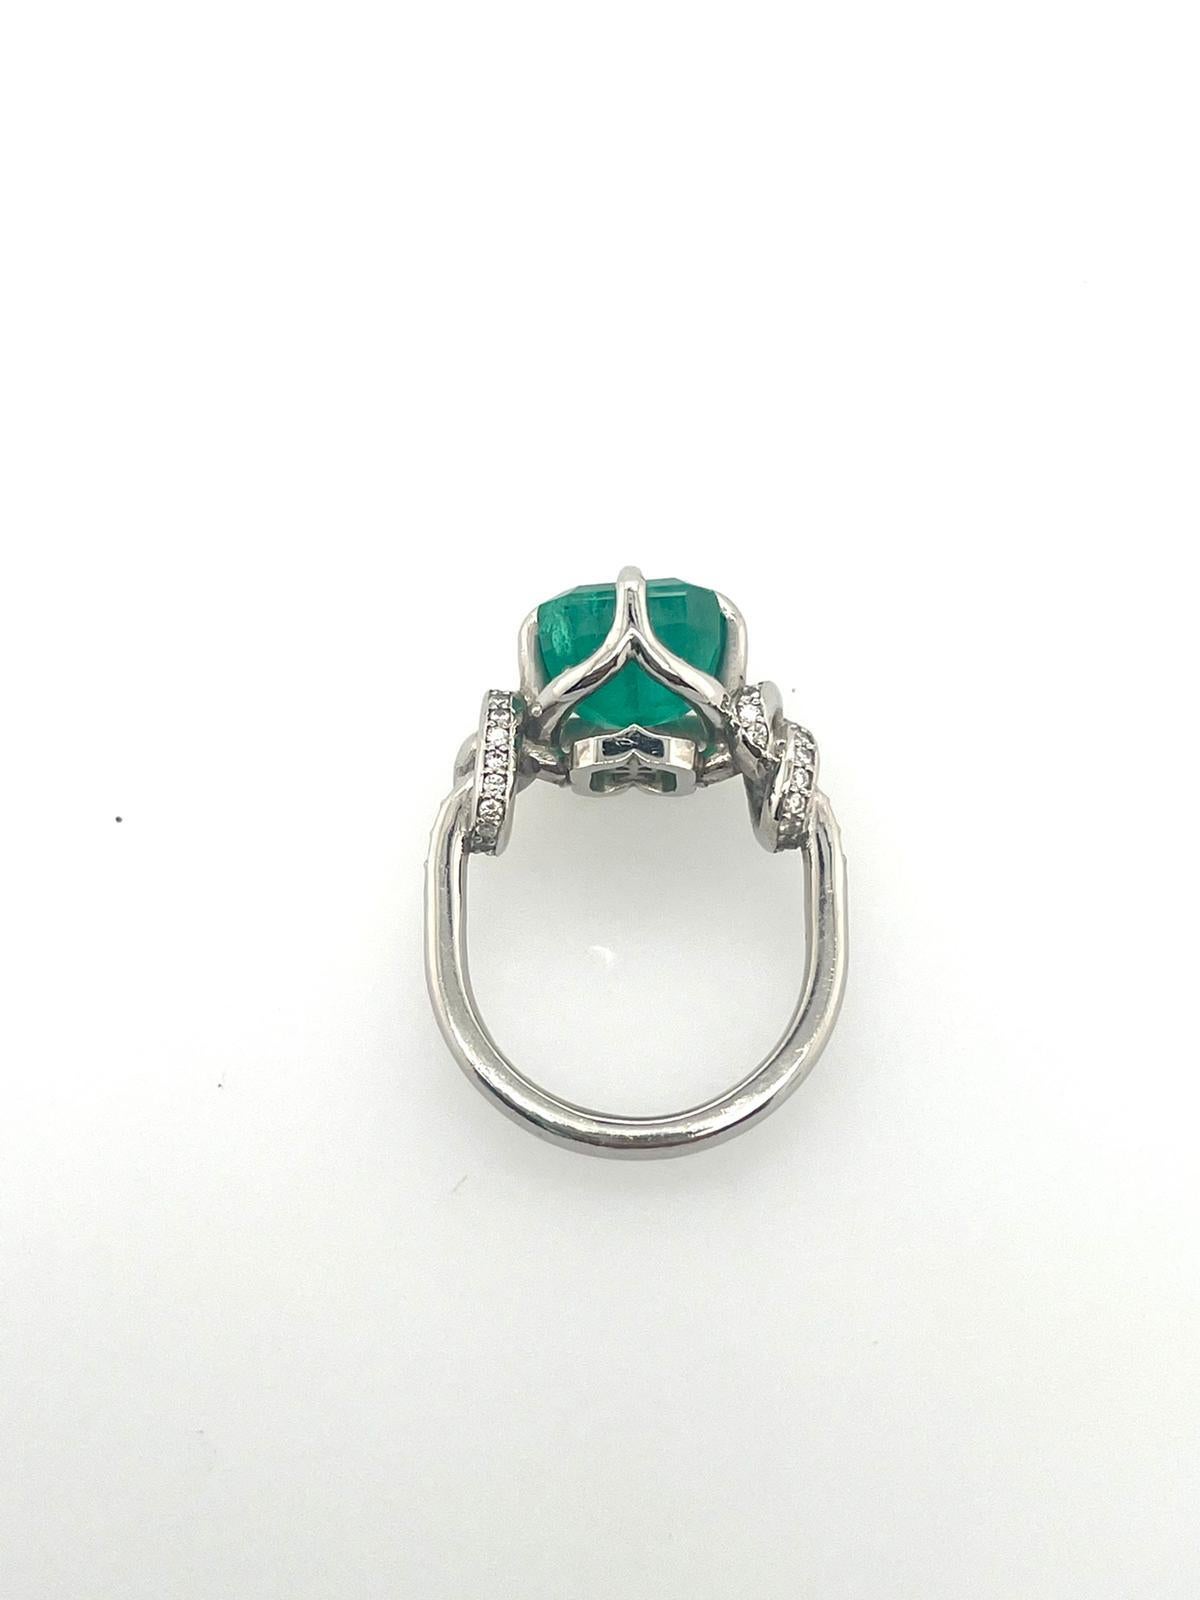 For Sale:  4ct Emerald solitaire in platinum with diamond knots  14